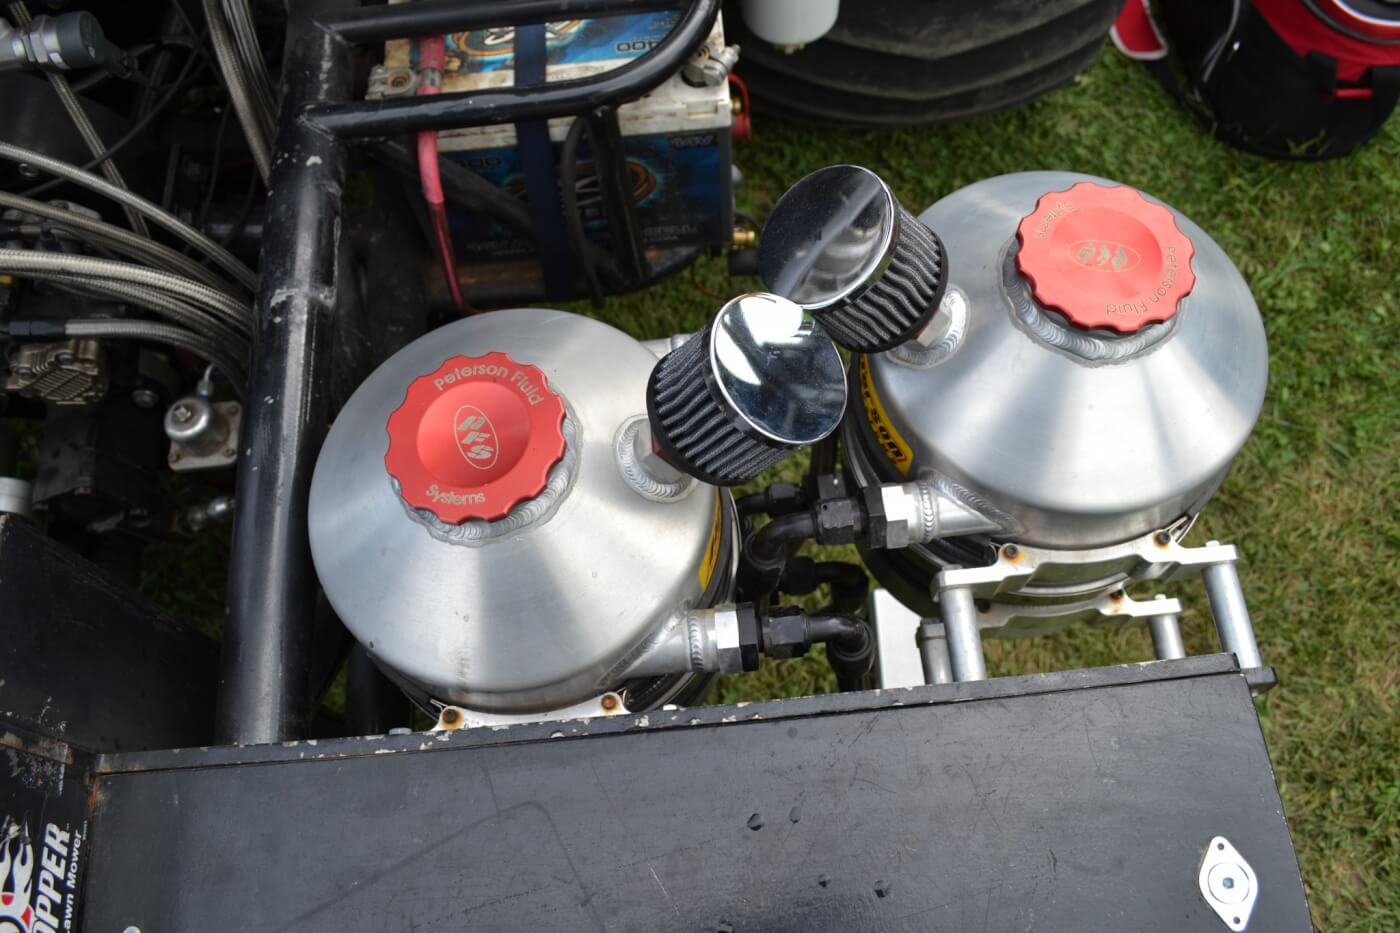 The oiling system for the Duramax system is quite complex, and uses an external wet sump system. Up front, four Peterson tanks (two on each side) hold oil for both the engine and turbo systems, as well as diesel fuel, and water for the water injection system. 